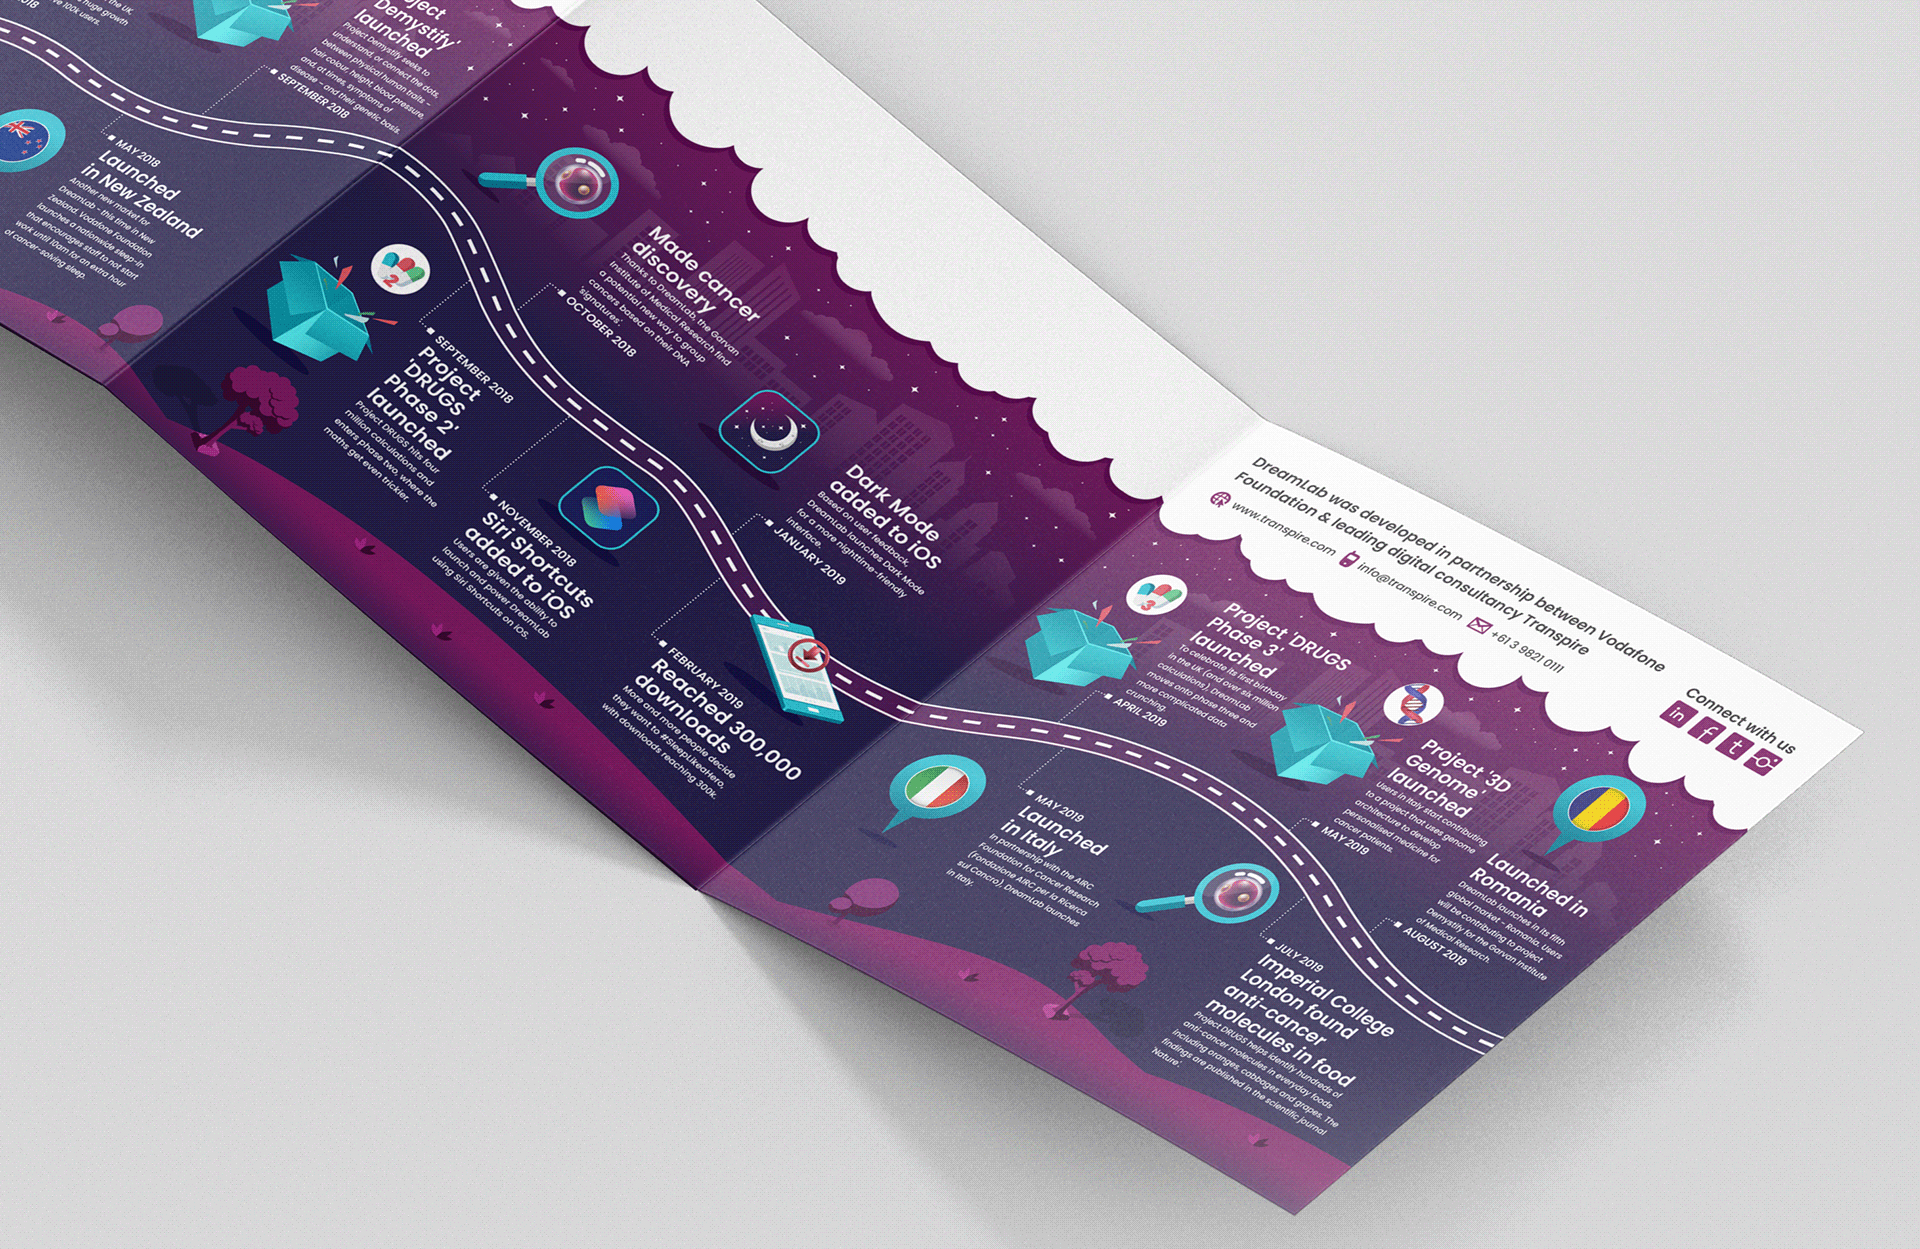 Elivera Designs Timeline Infographic for Mobile App for Transpire in collaboration with Vodafone Foundation